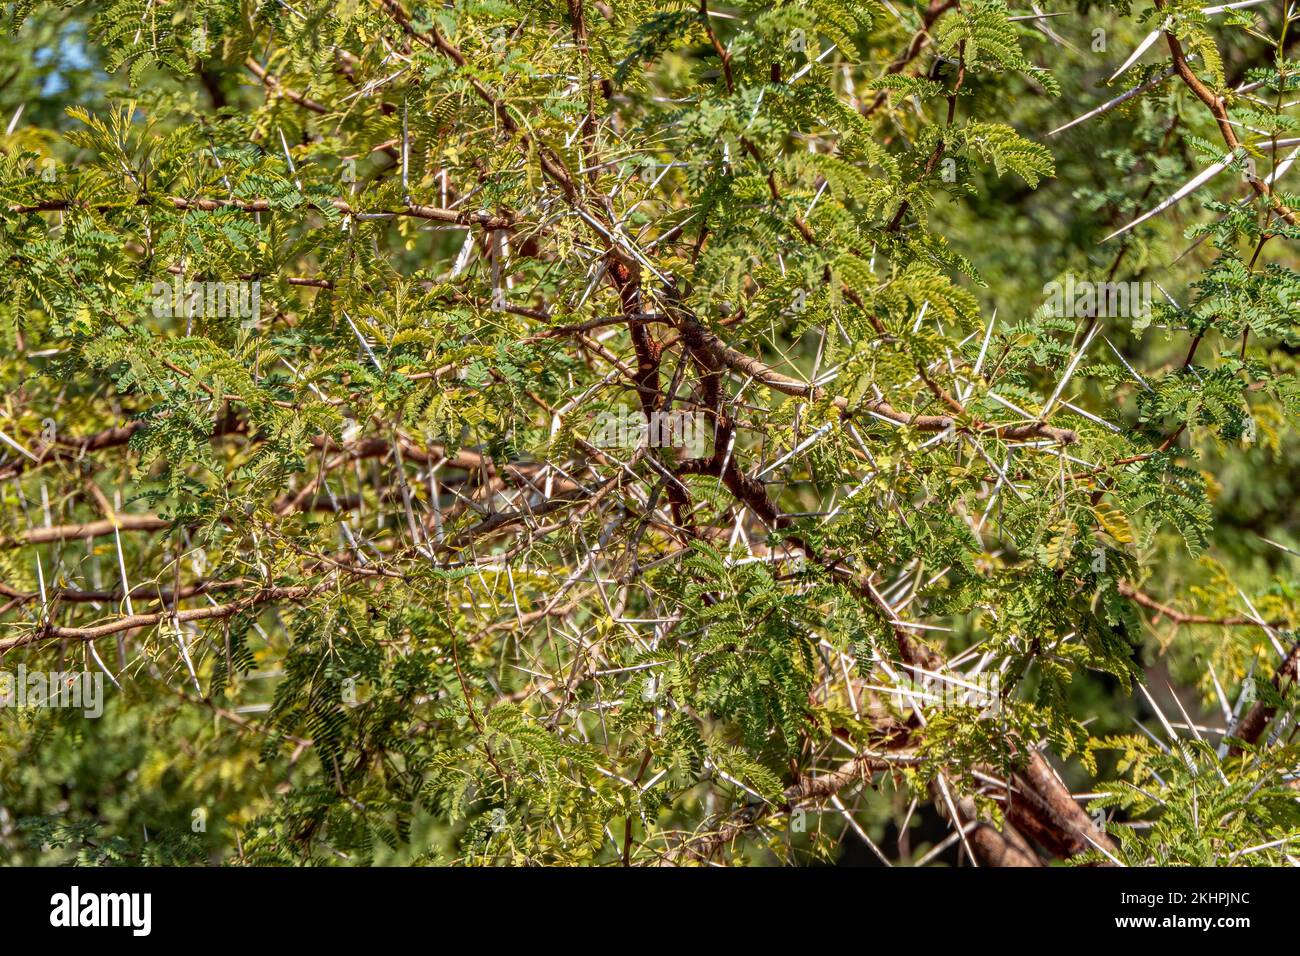 Acacia tree branches with thorns and young green leaves close up Stock Photo